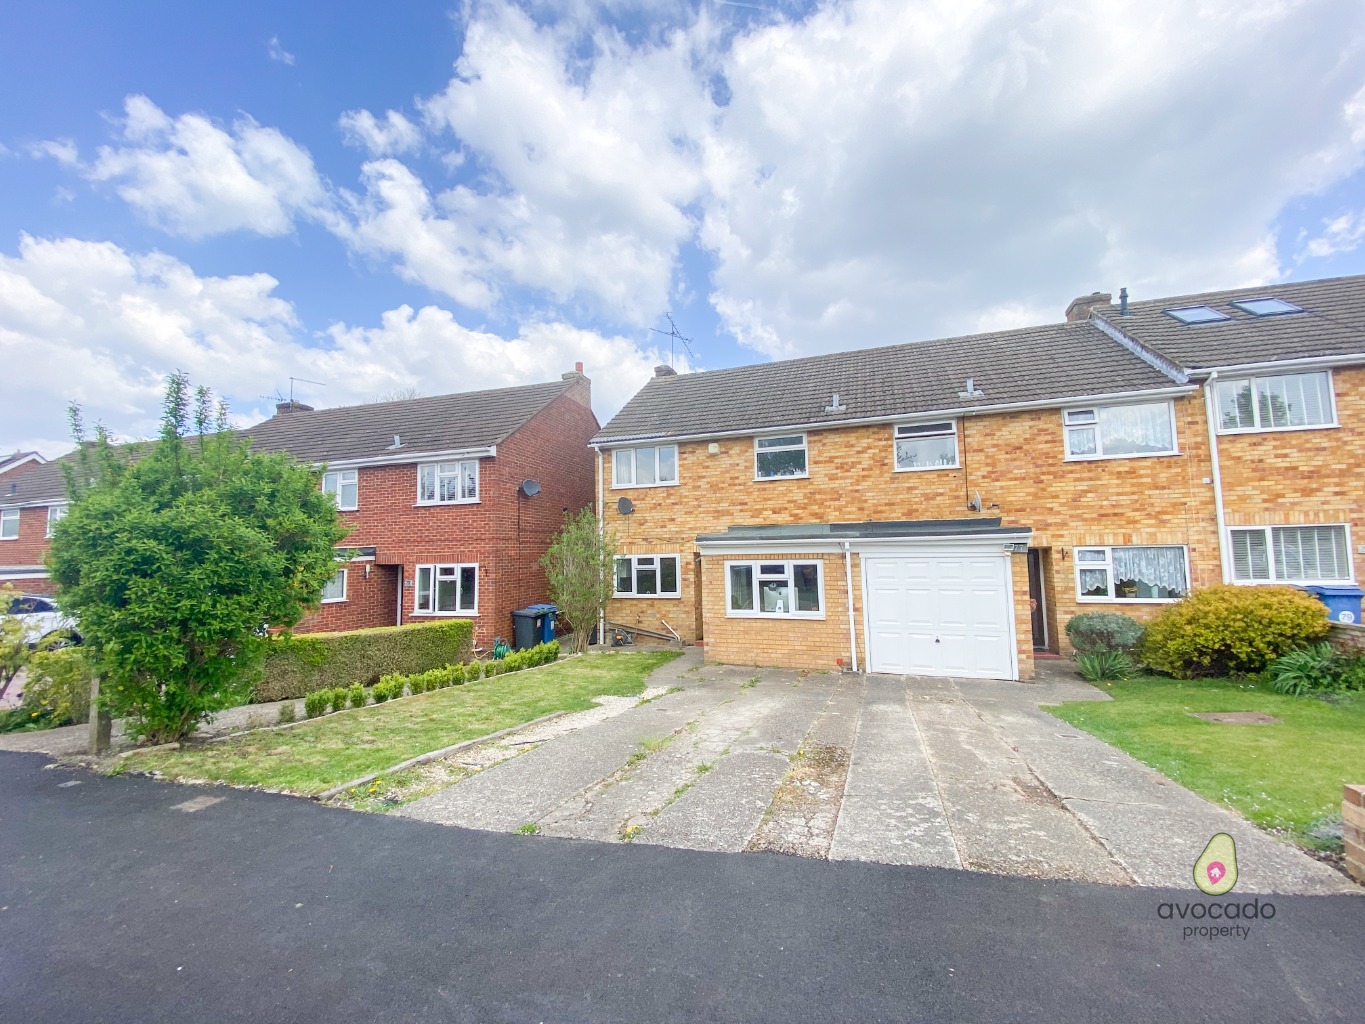 Check out this three double bedroom end of terrace family home with driveway parking, space for a home office and a rear garden